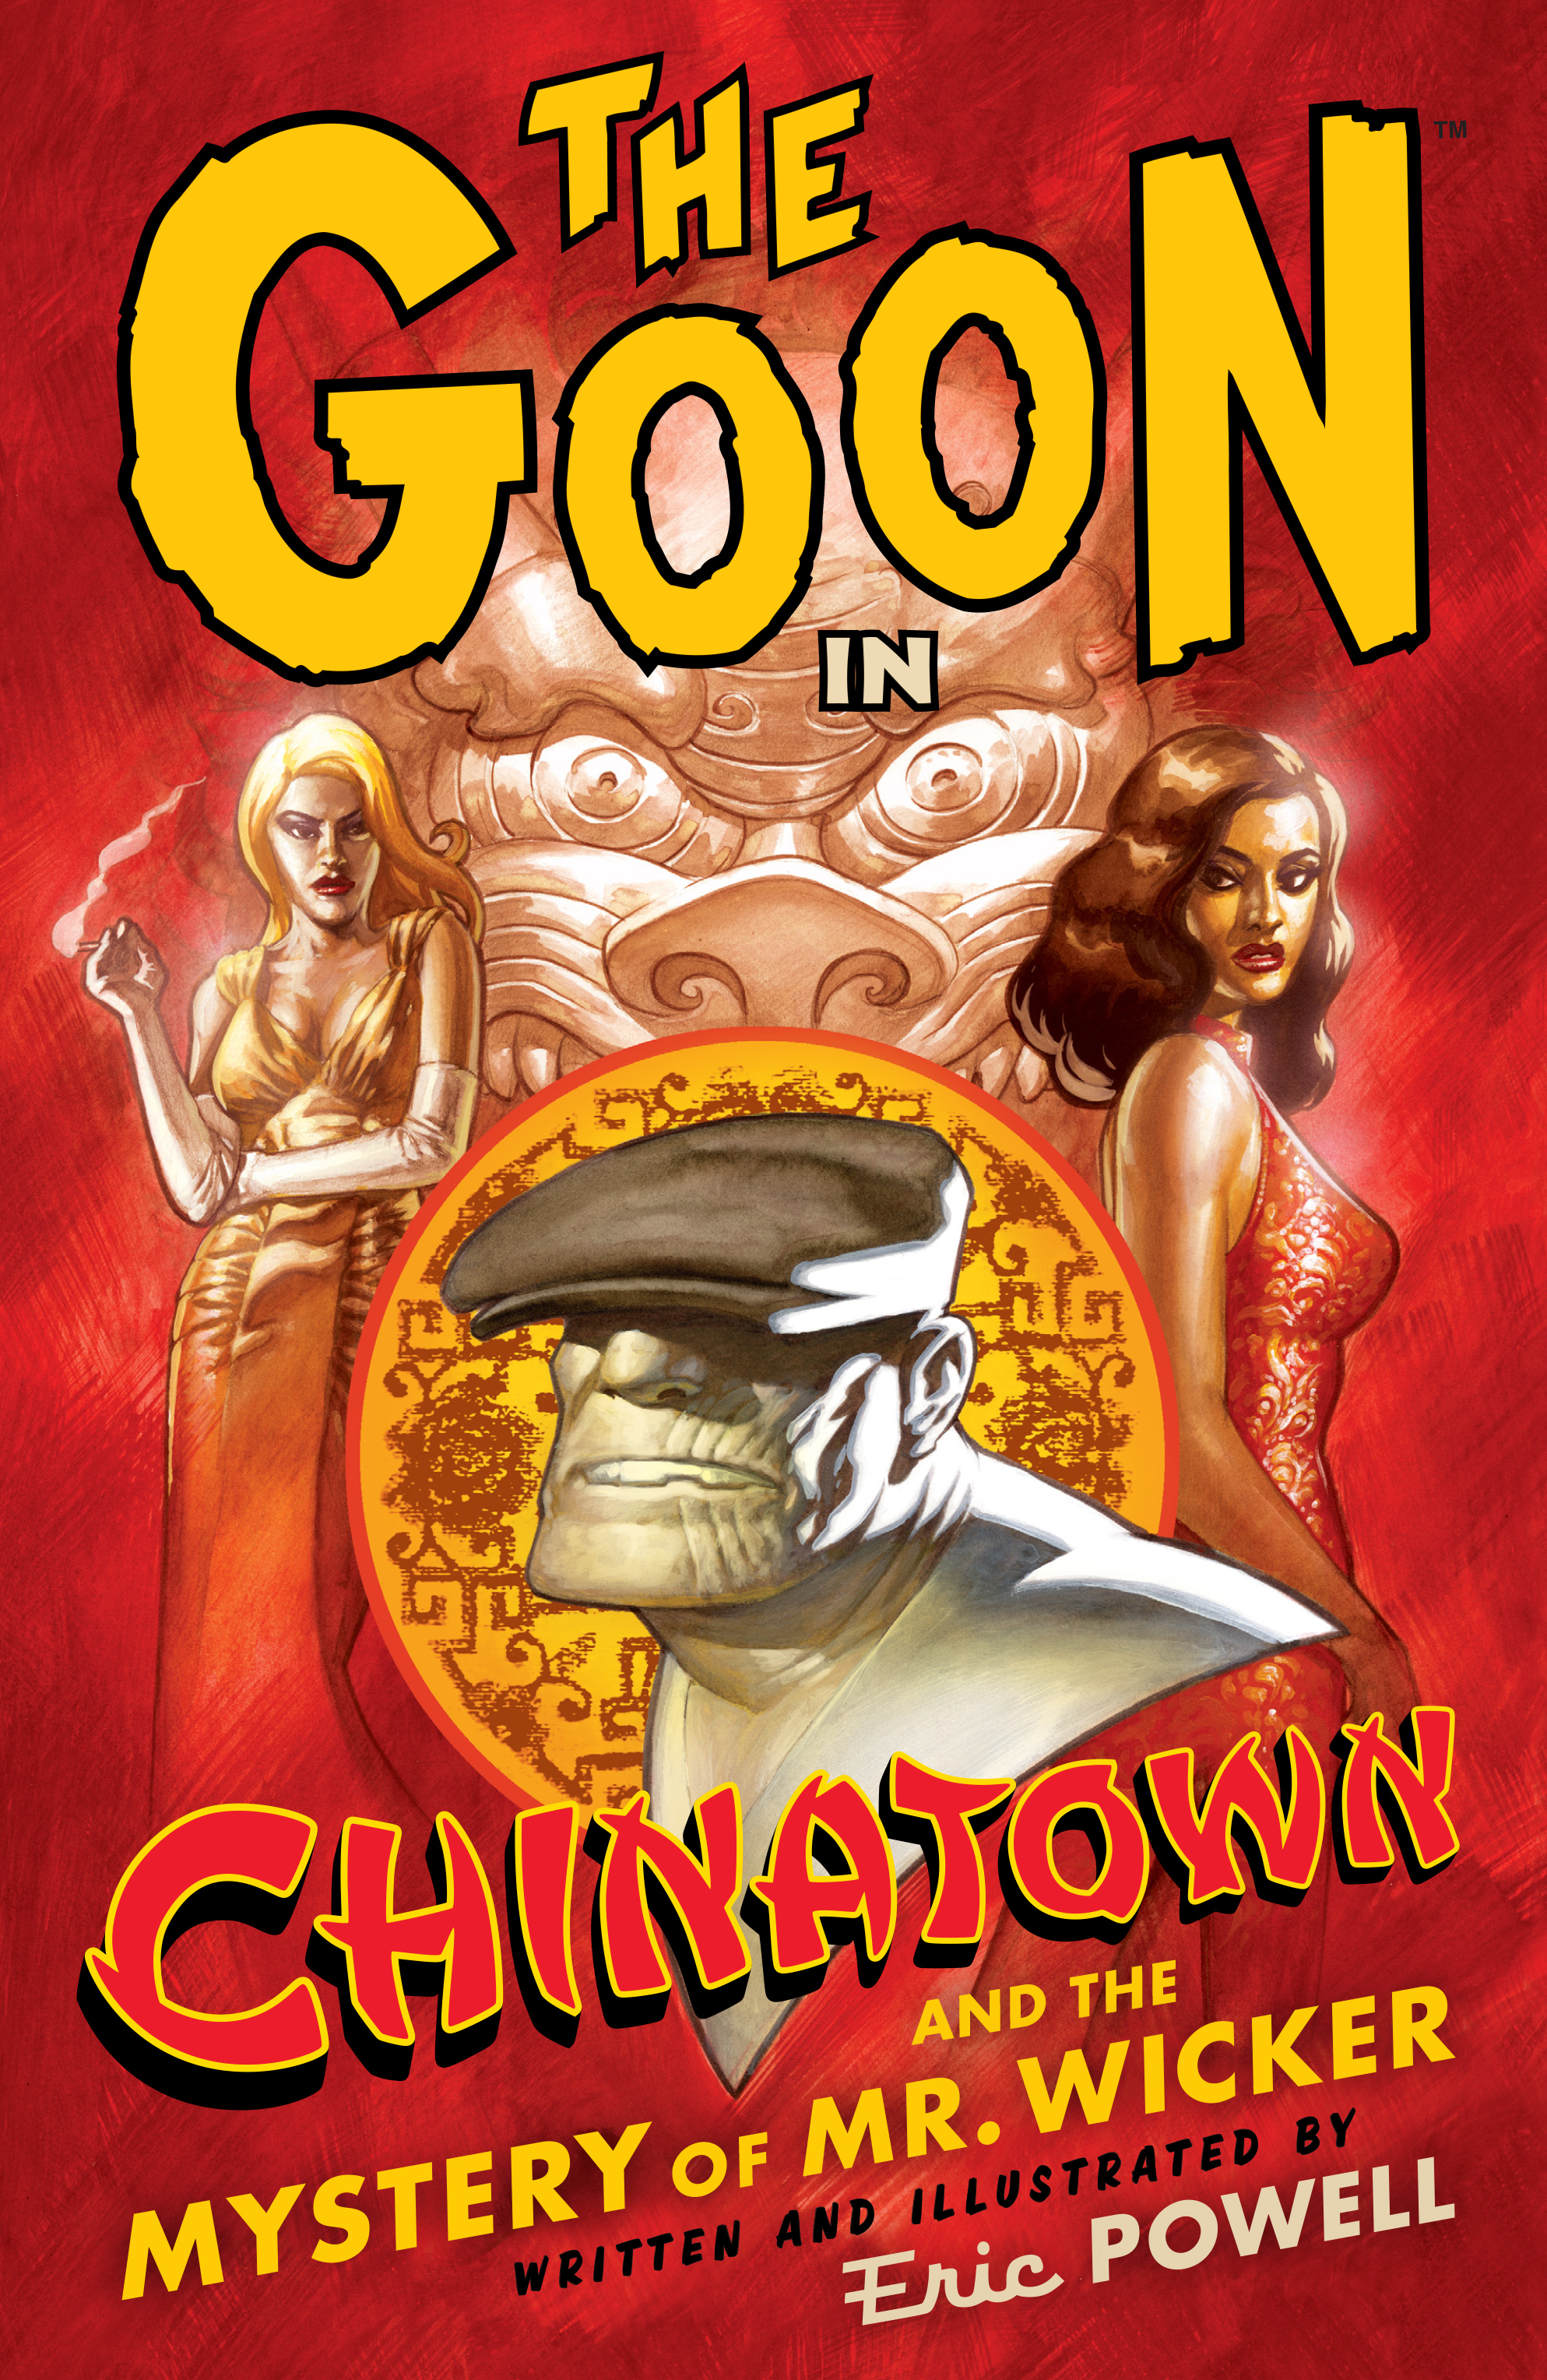 Read online The Goon: Chinatown and the Mystery of Mr. Wicker comic -  Issue # TPB - 1